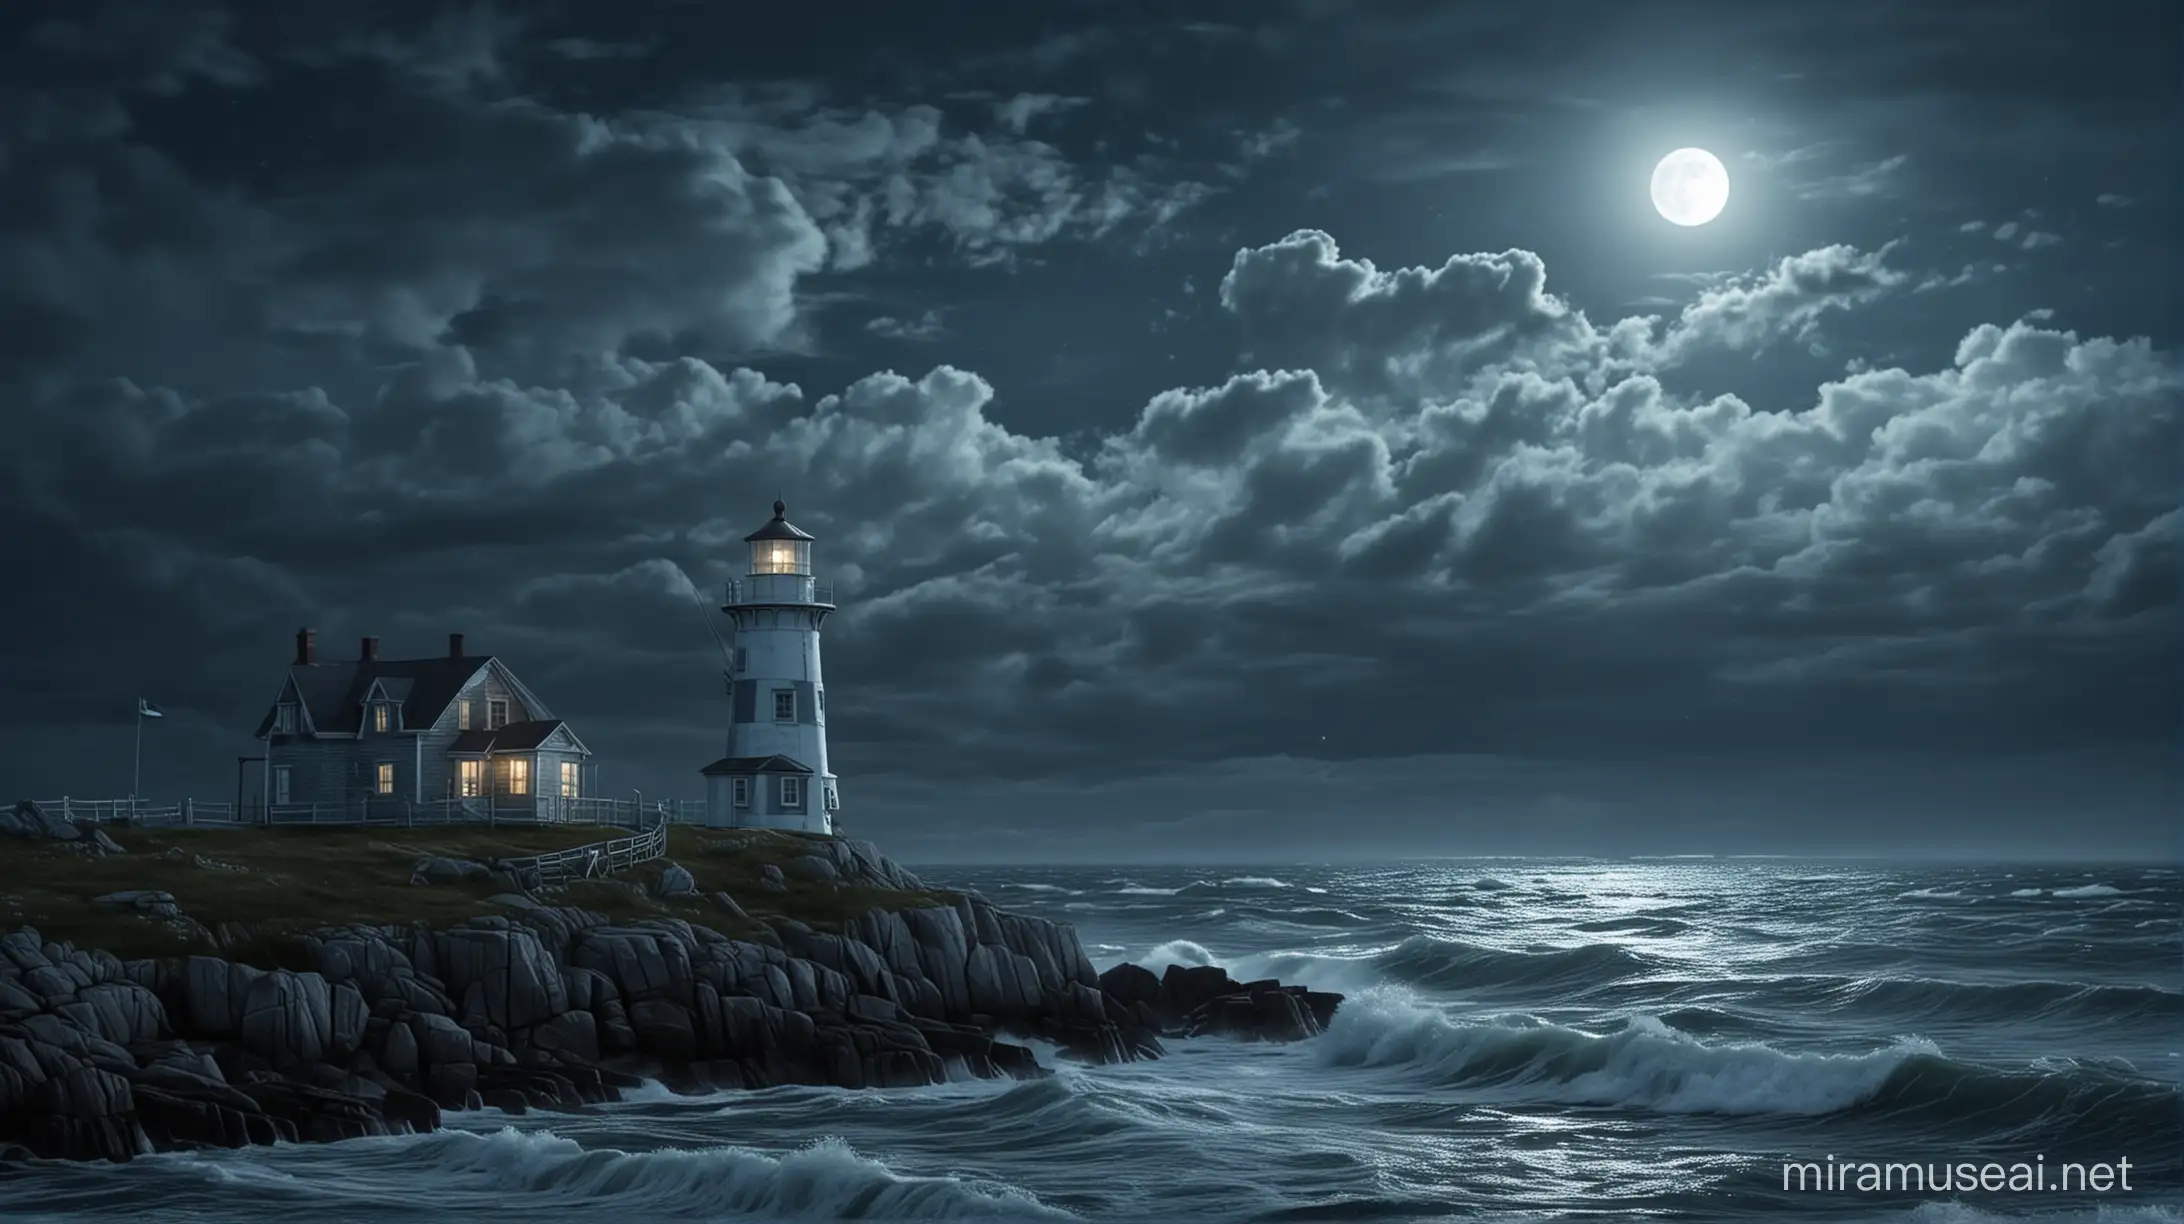 Shabby Lighthouse in Nova Scotia Moonlit Night with Storm Clouds